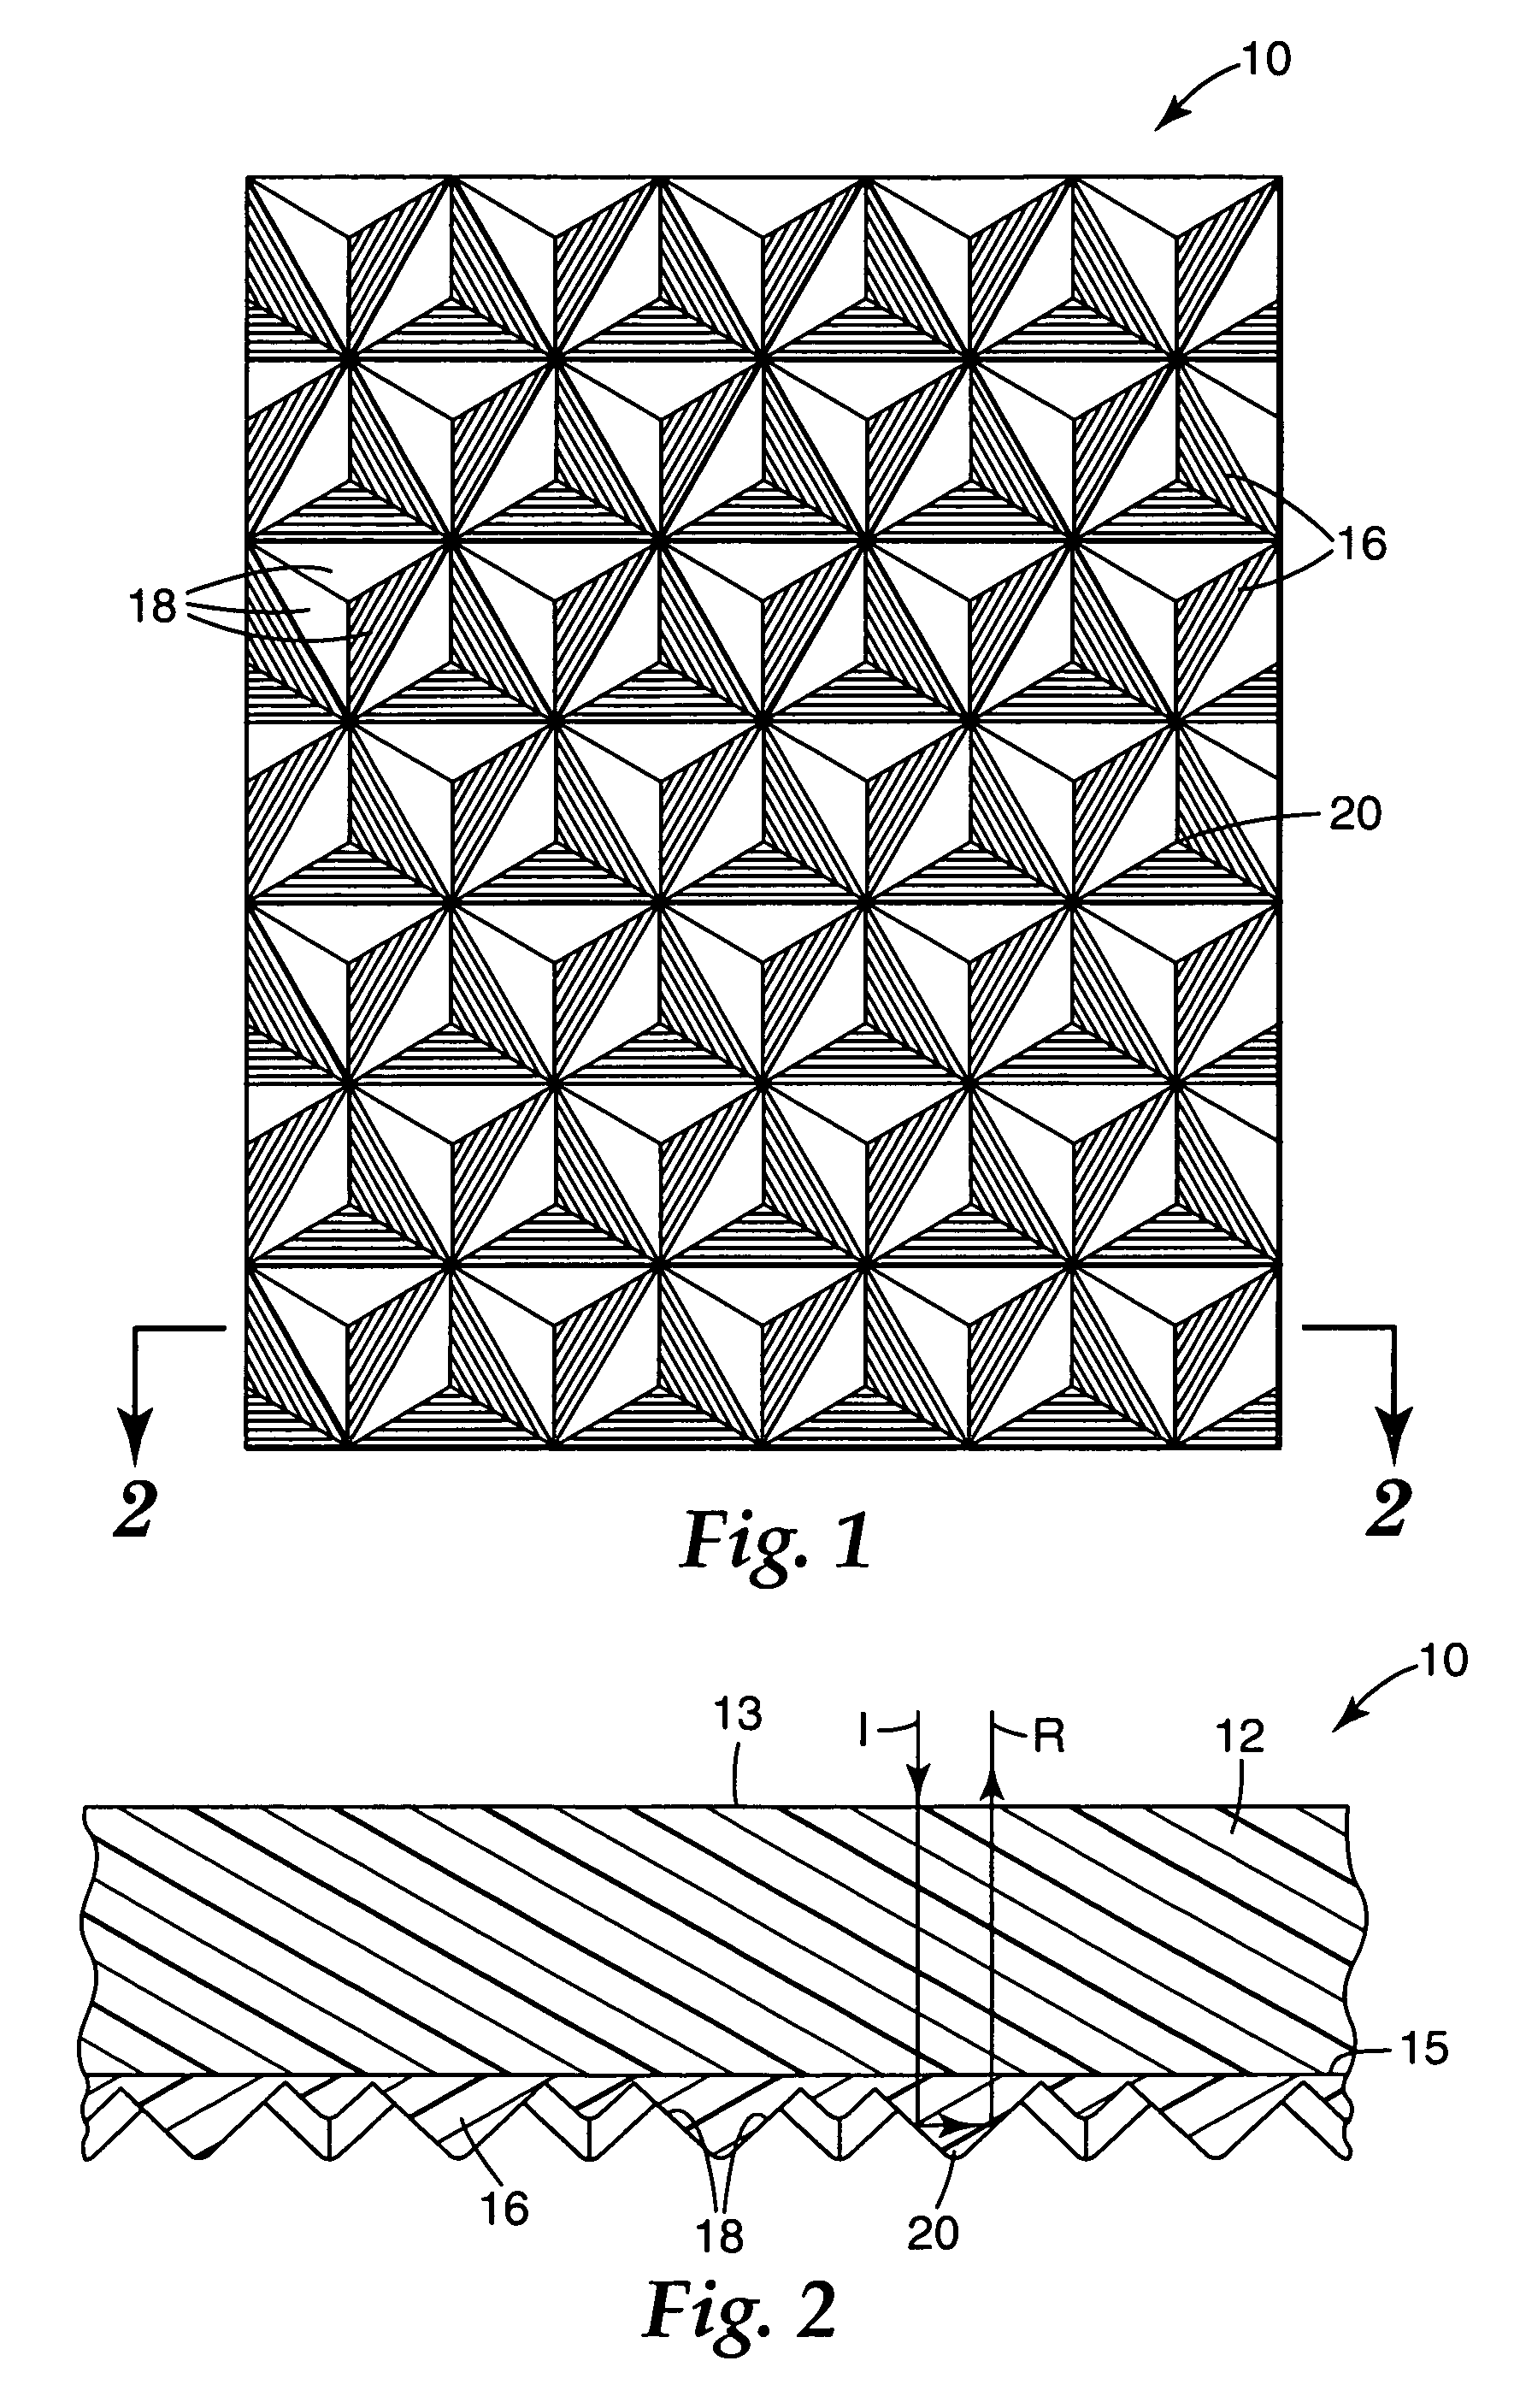 Prismatic retroreflective article with fluorine- or silicon-containing prisms